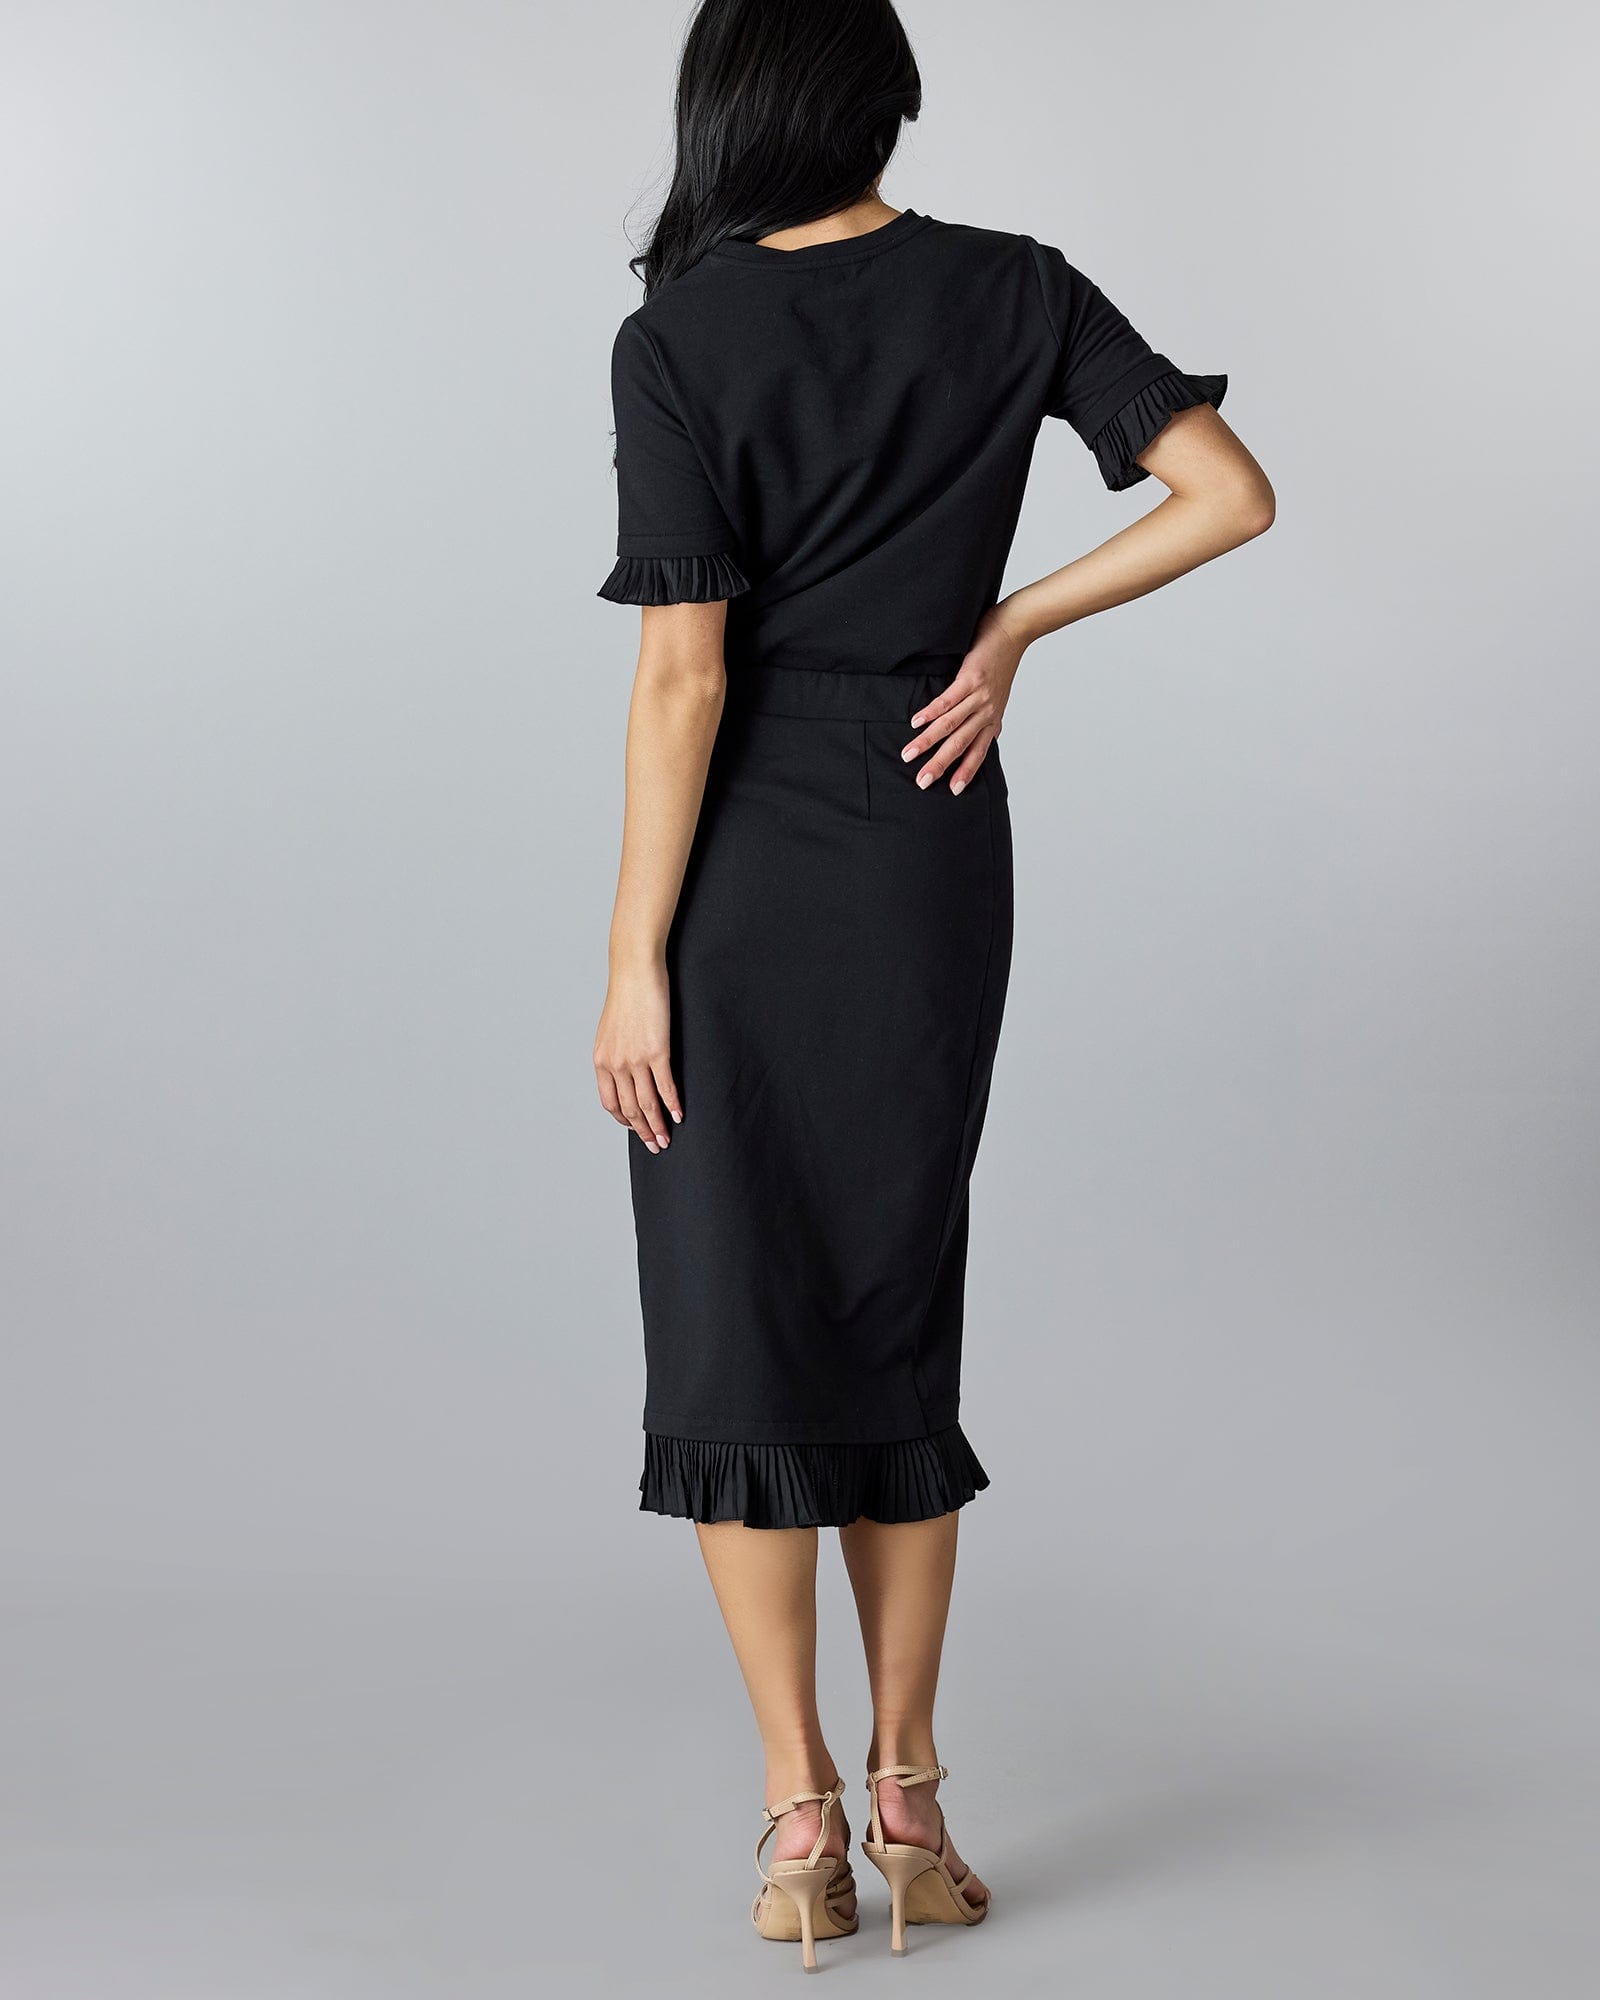 Woman in a black pencil skirt with ruffle at bottom.